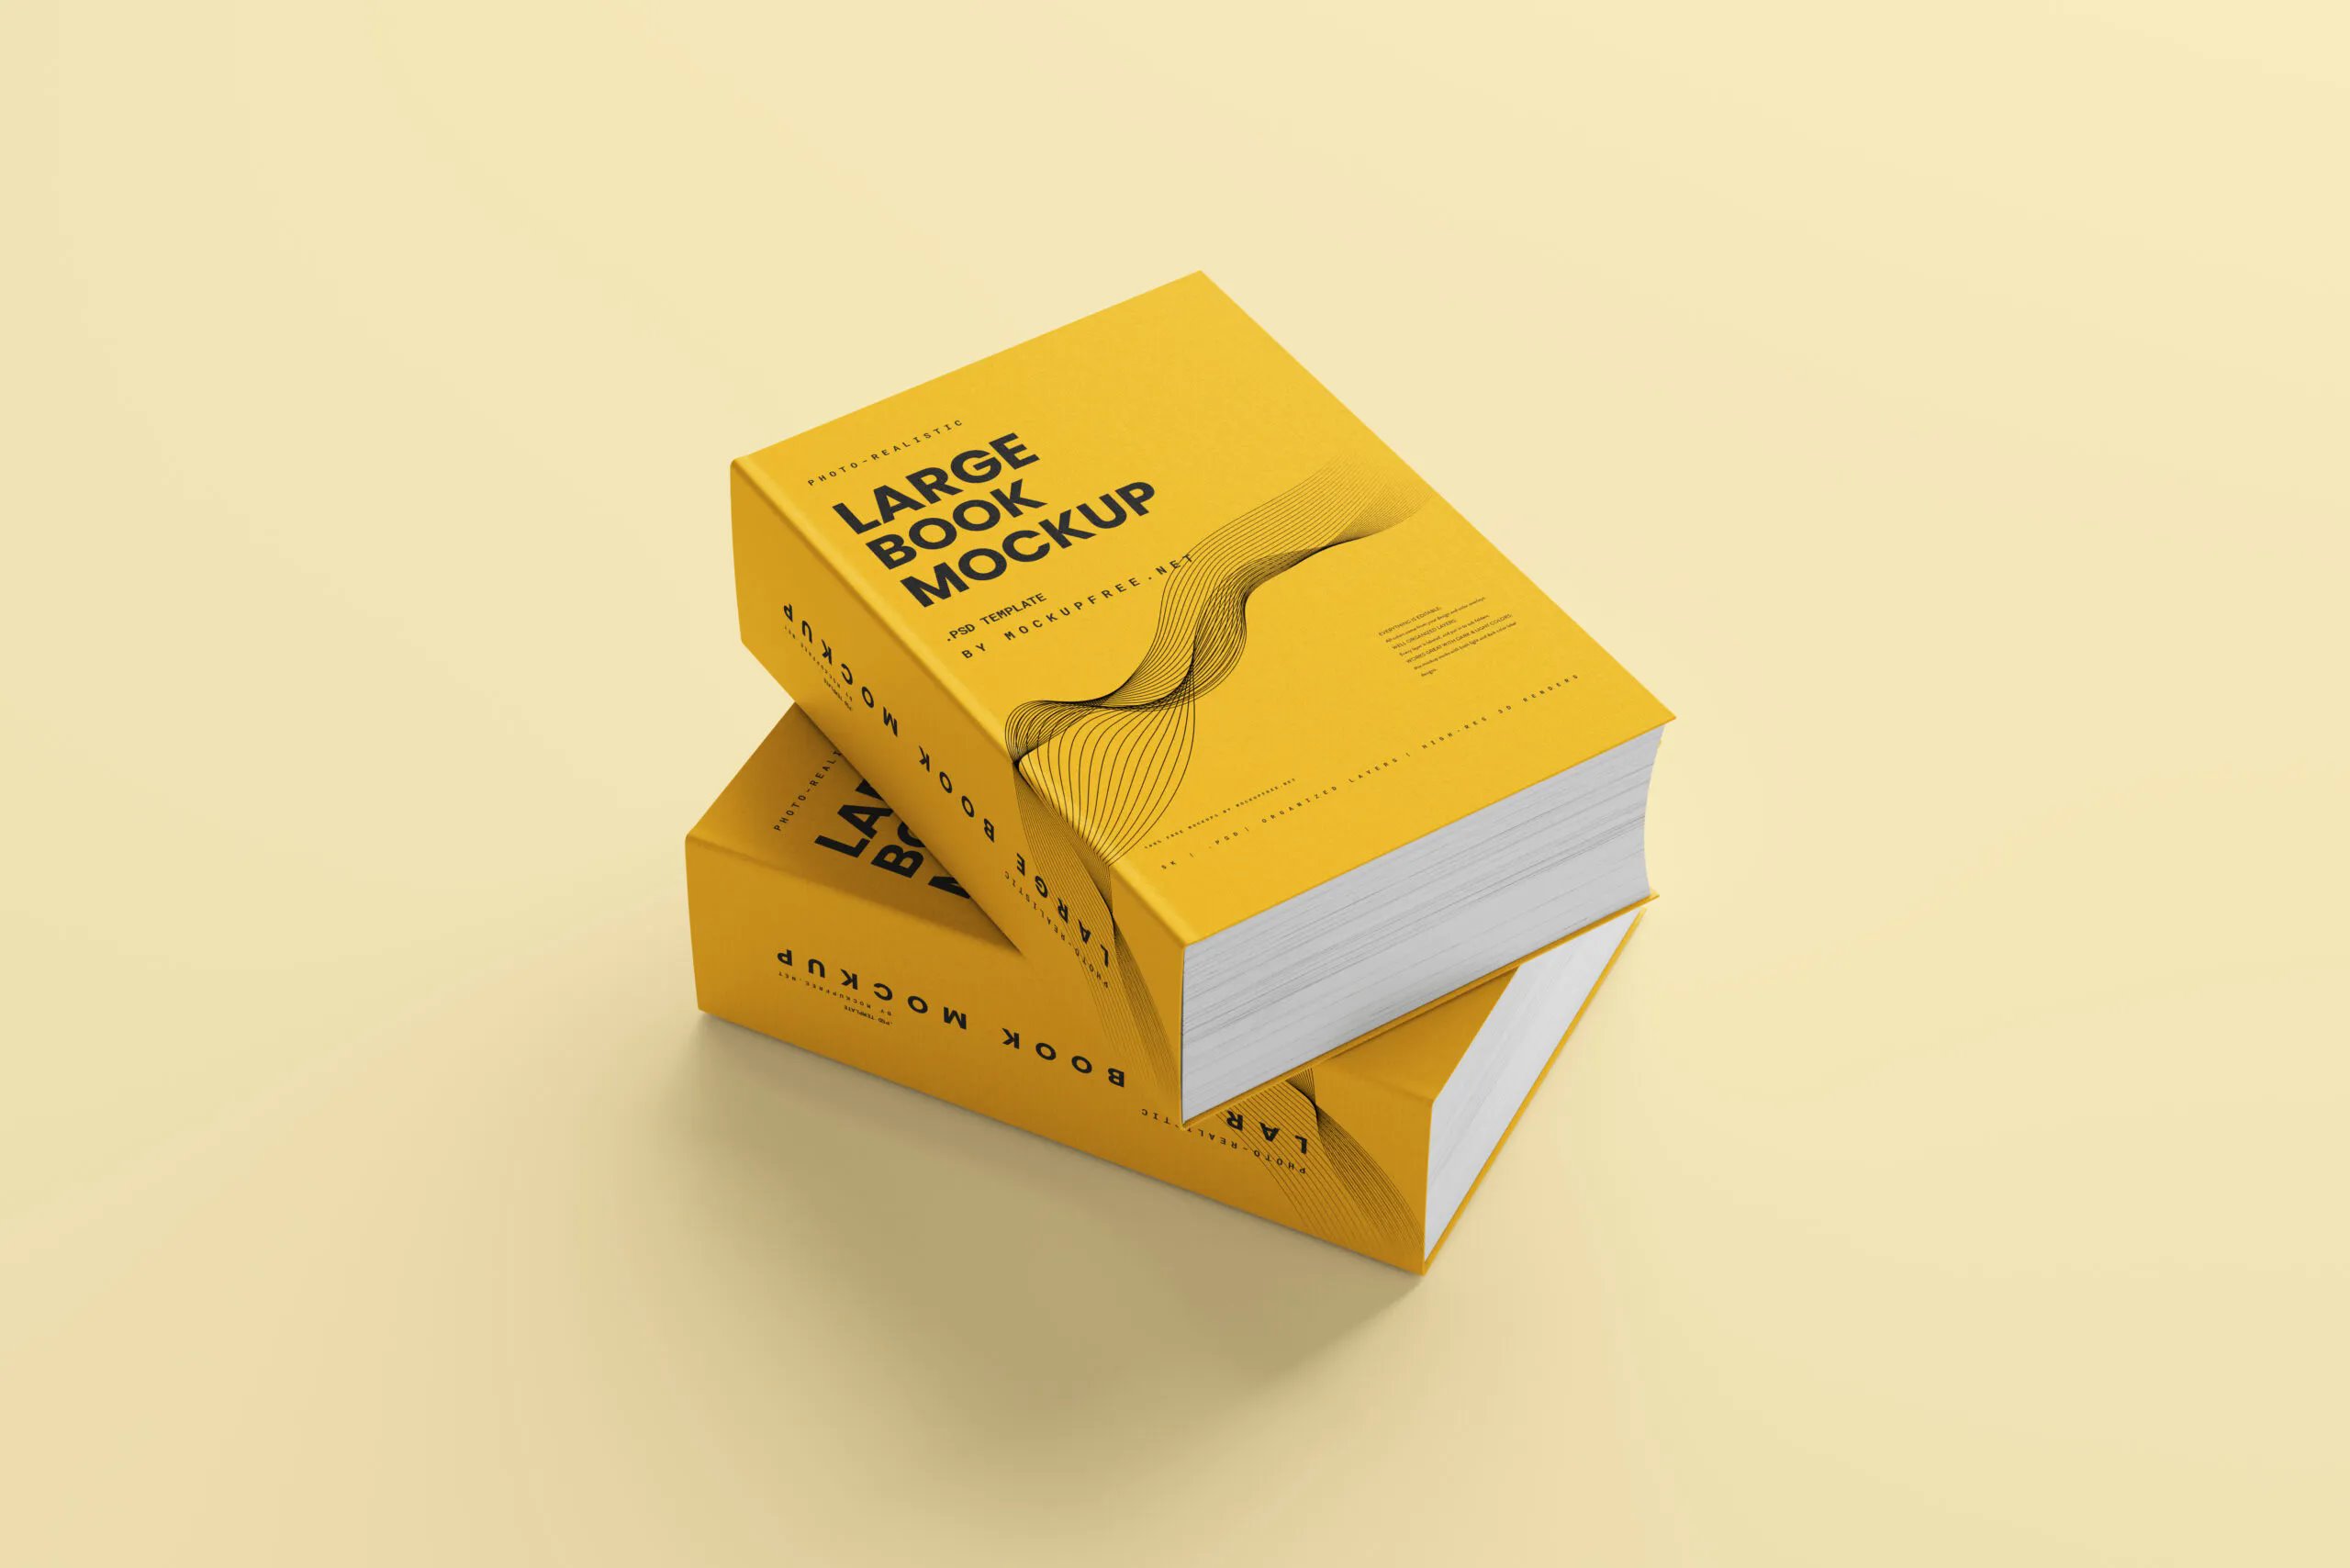 5 Large Hard Cover Books Mockups in Varied Visions FREE PSD